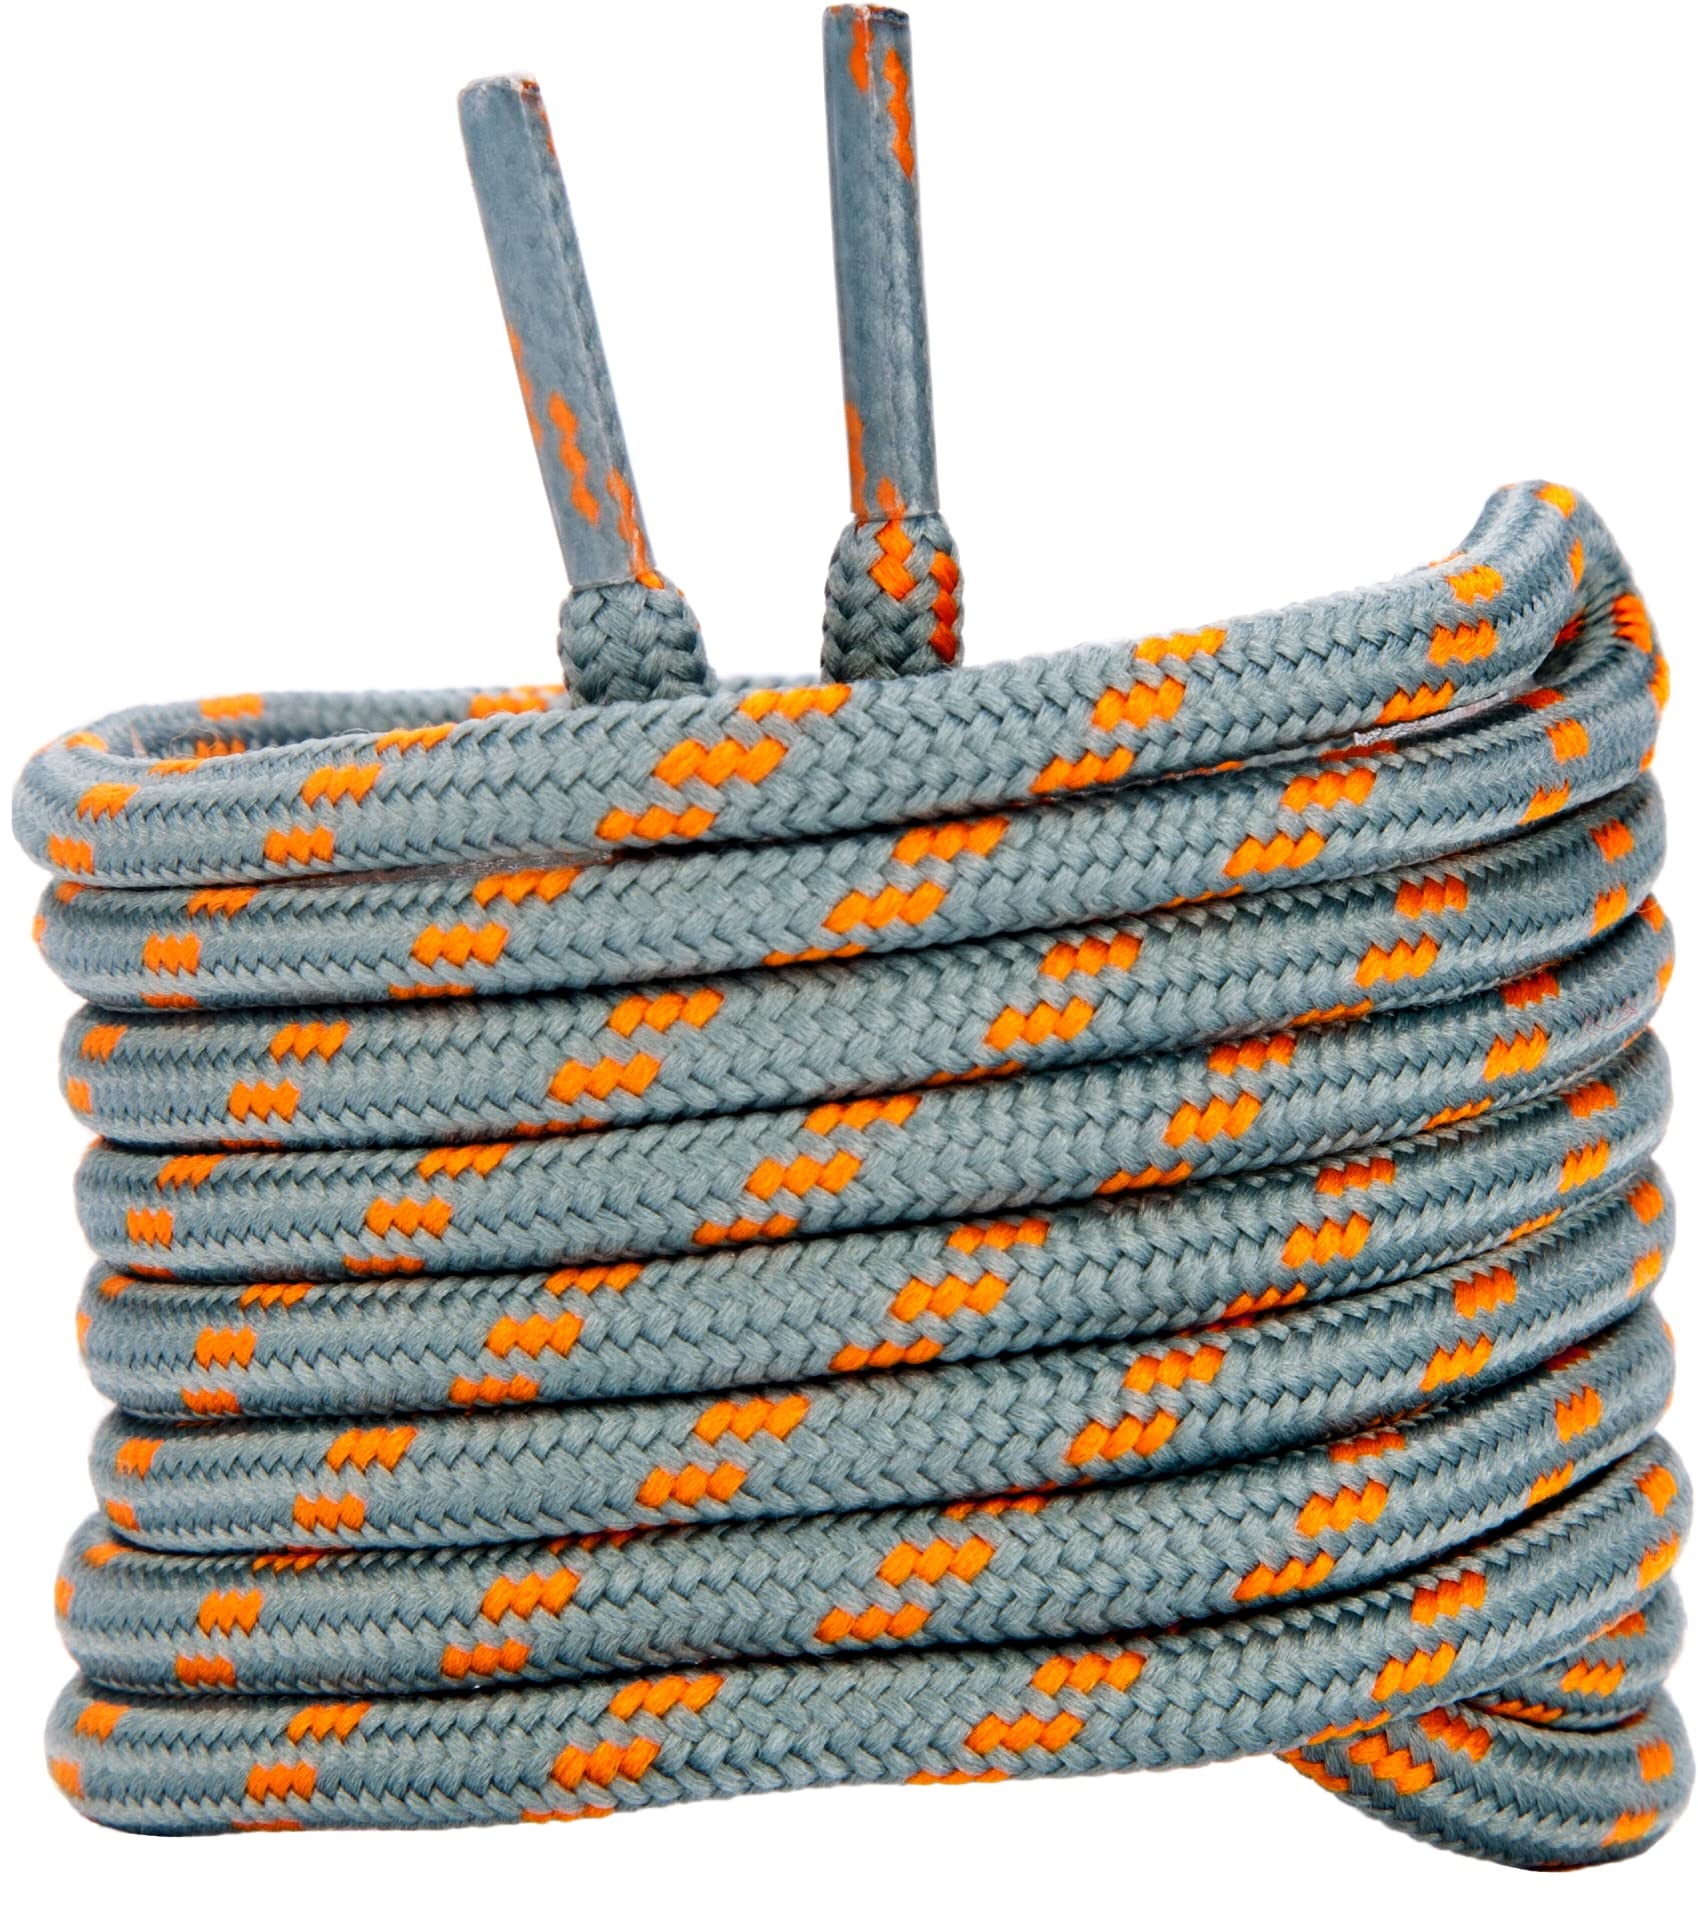 Tolumo Diameter 4.5 MM Round Durable Boot Laces Lengths 100 to 160 CM Shoelaces for Work and Leisure Boots, Hiking Shoes Light grey Orange 100 CM 1 Pair - 100cm - 1 Pair